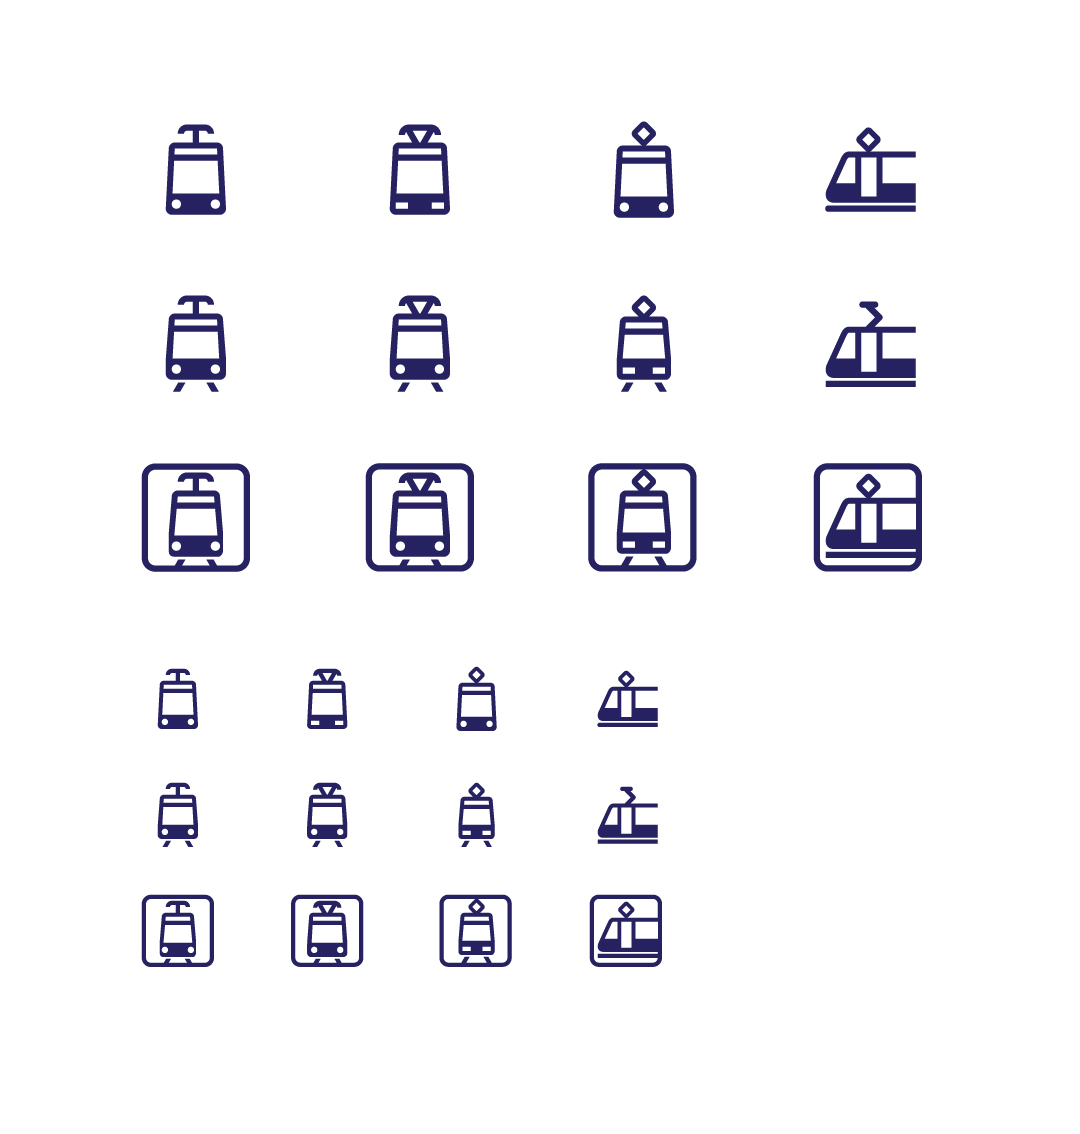 icons vector graphic interface icons interaction Vector Illustration public transport Mobile Application jajkdojade poland city route